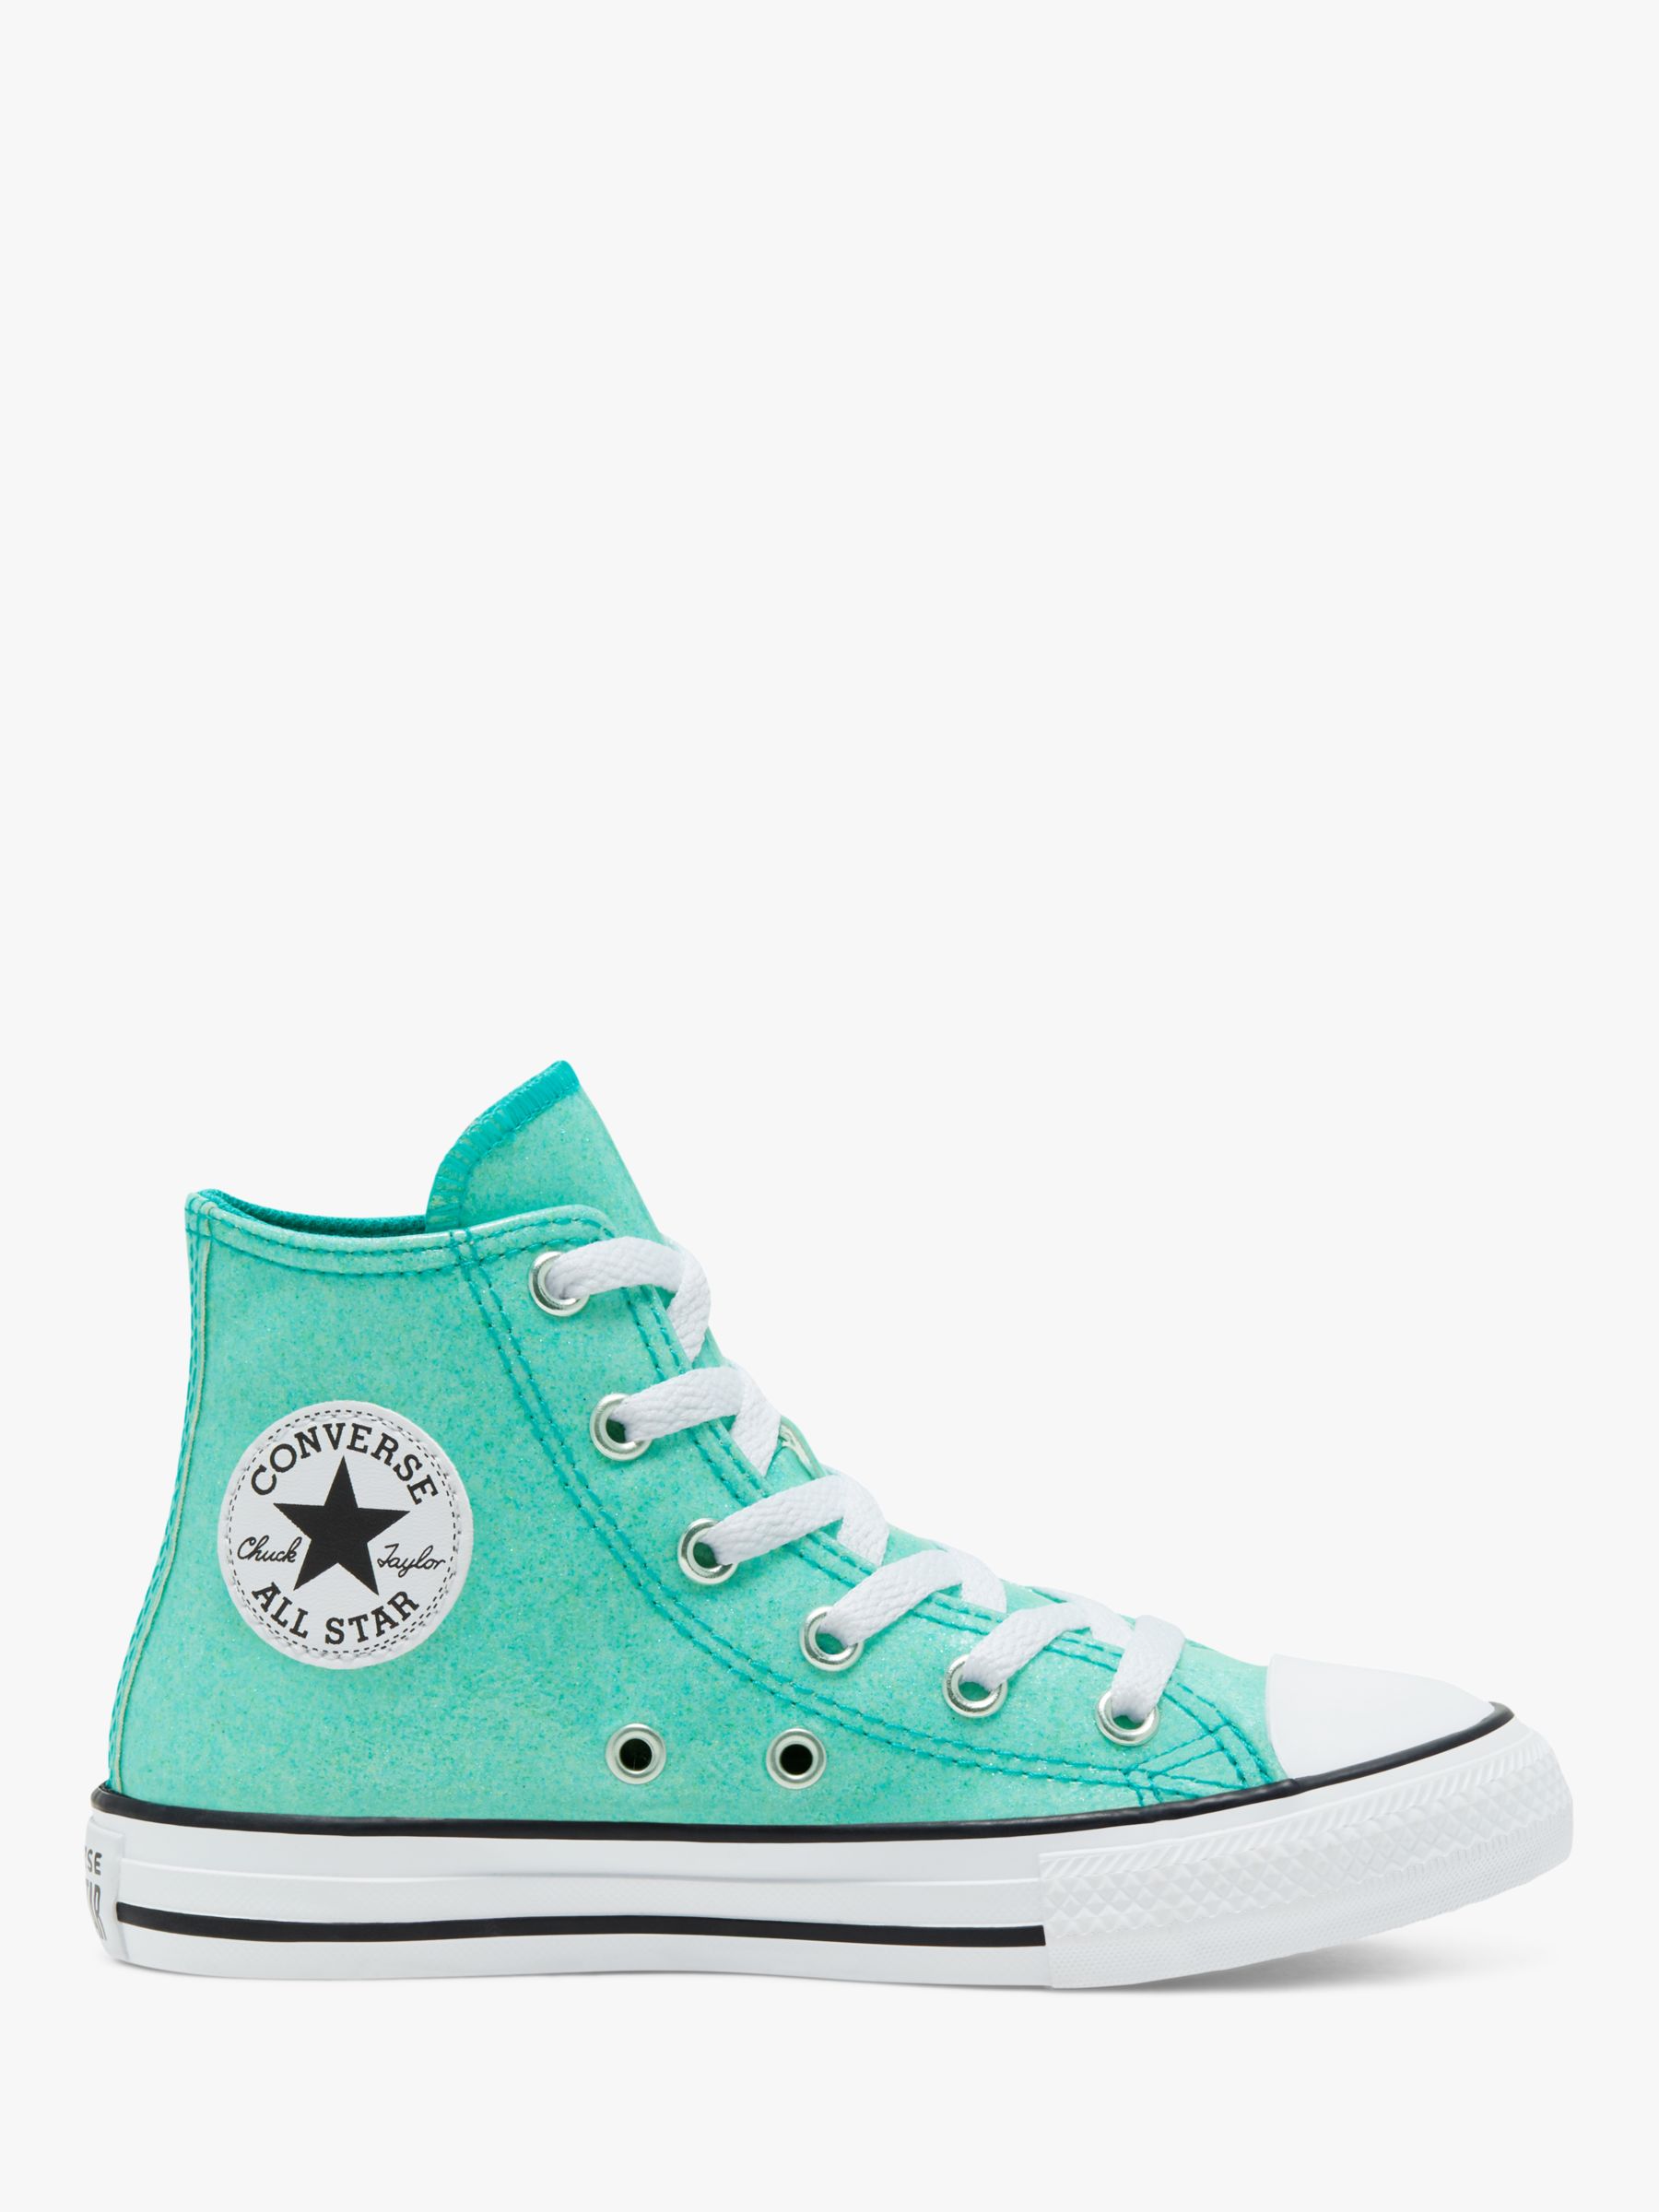 turquoise glitter converse